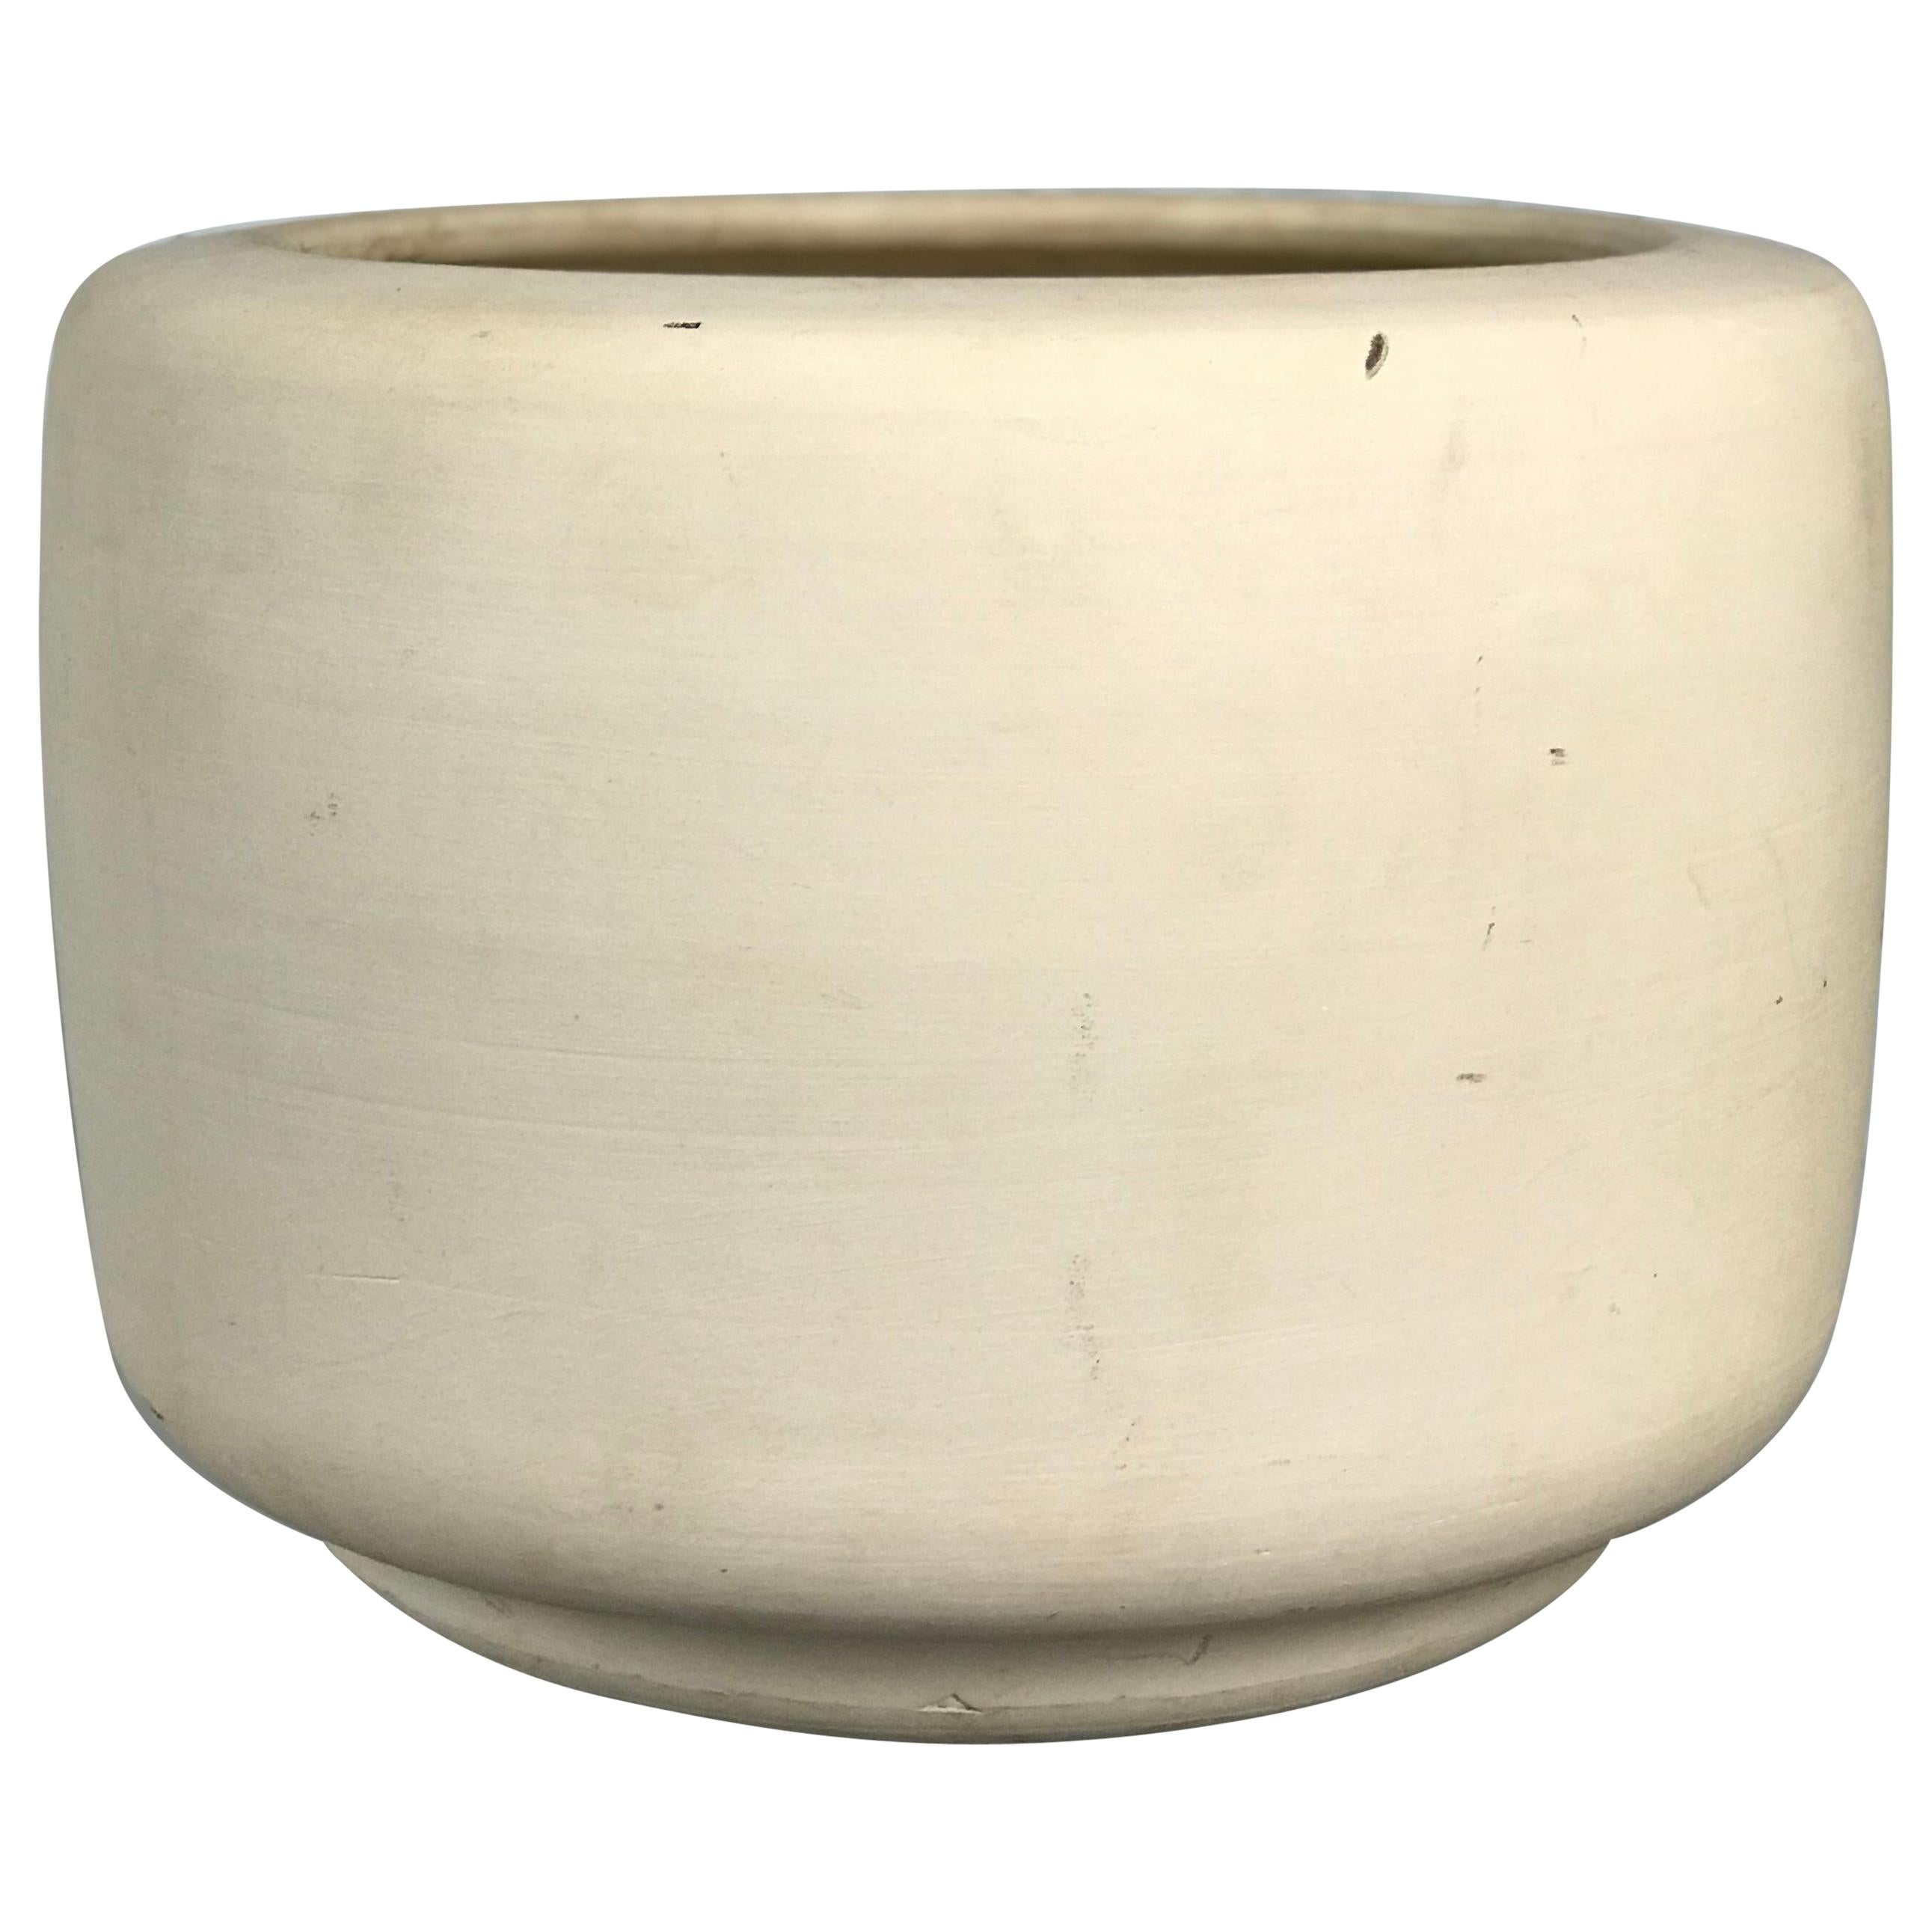 Architectural Pottery "Tire" Planter in Bisque by John Follis & Rex Goode, 1960s